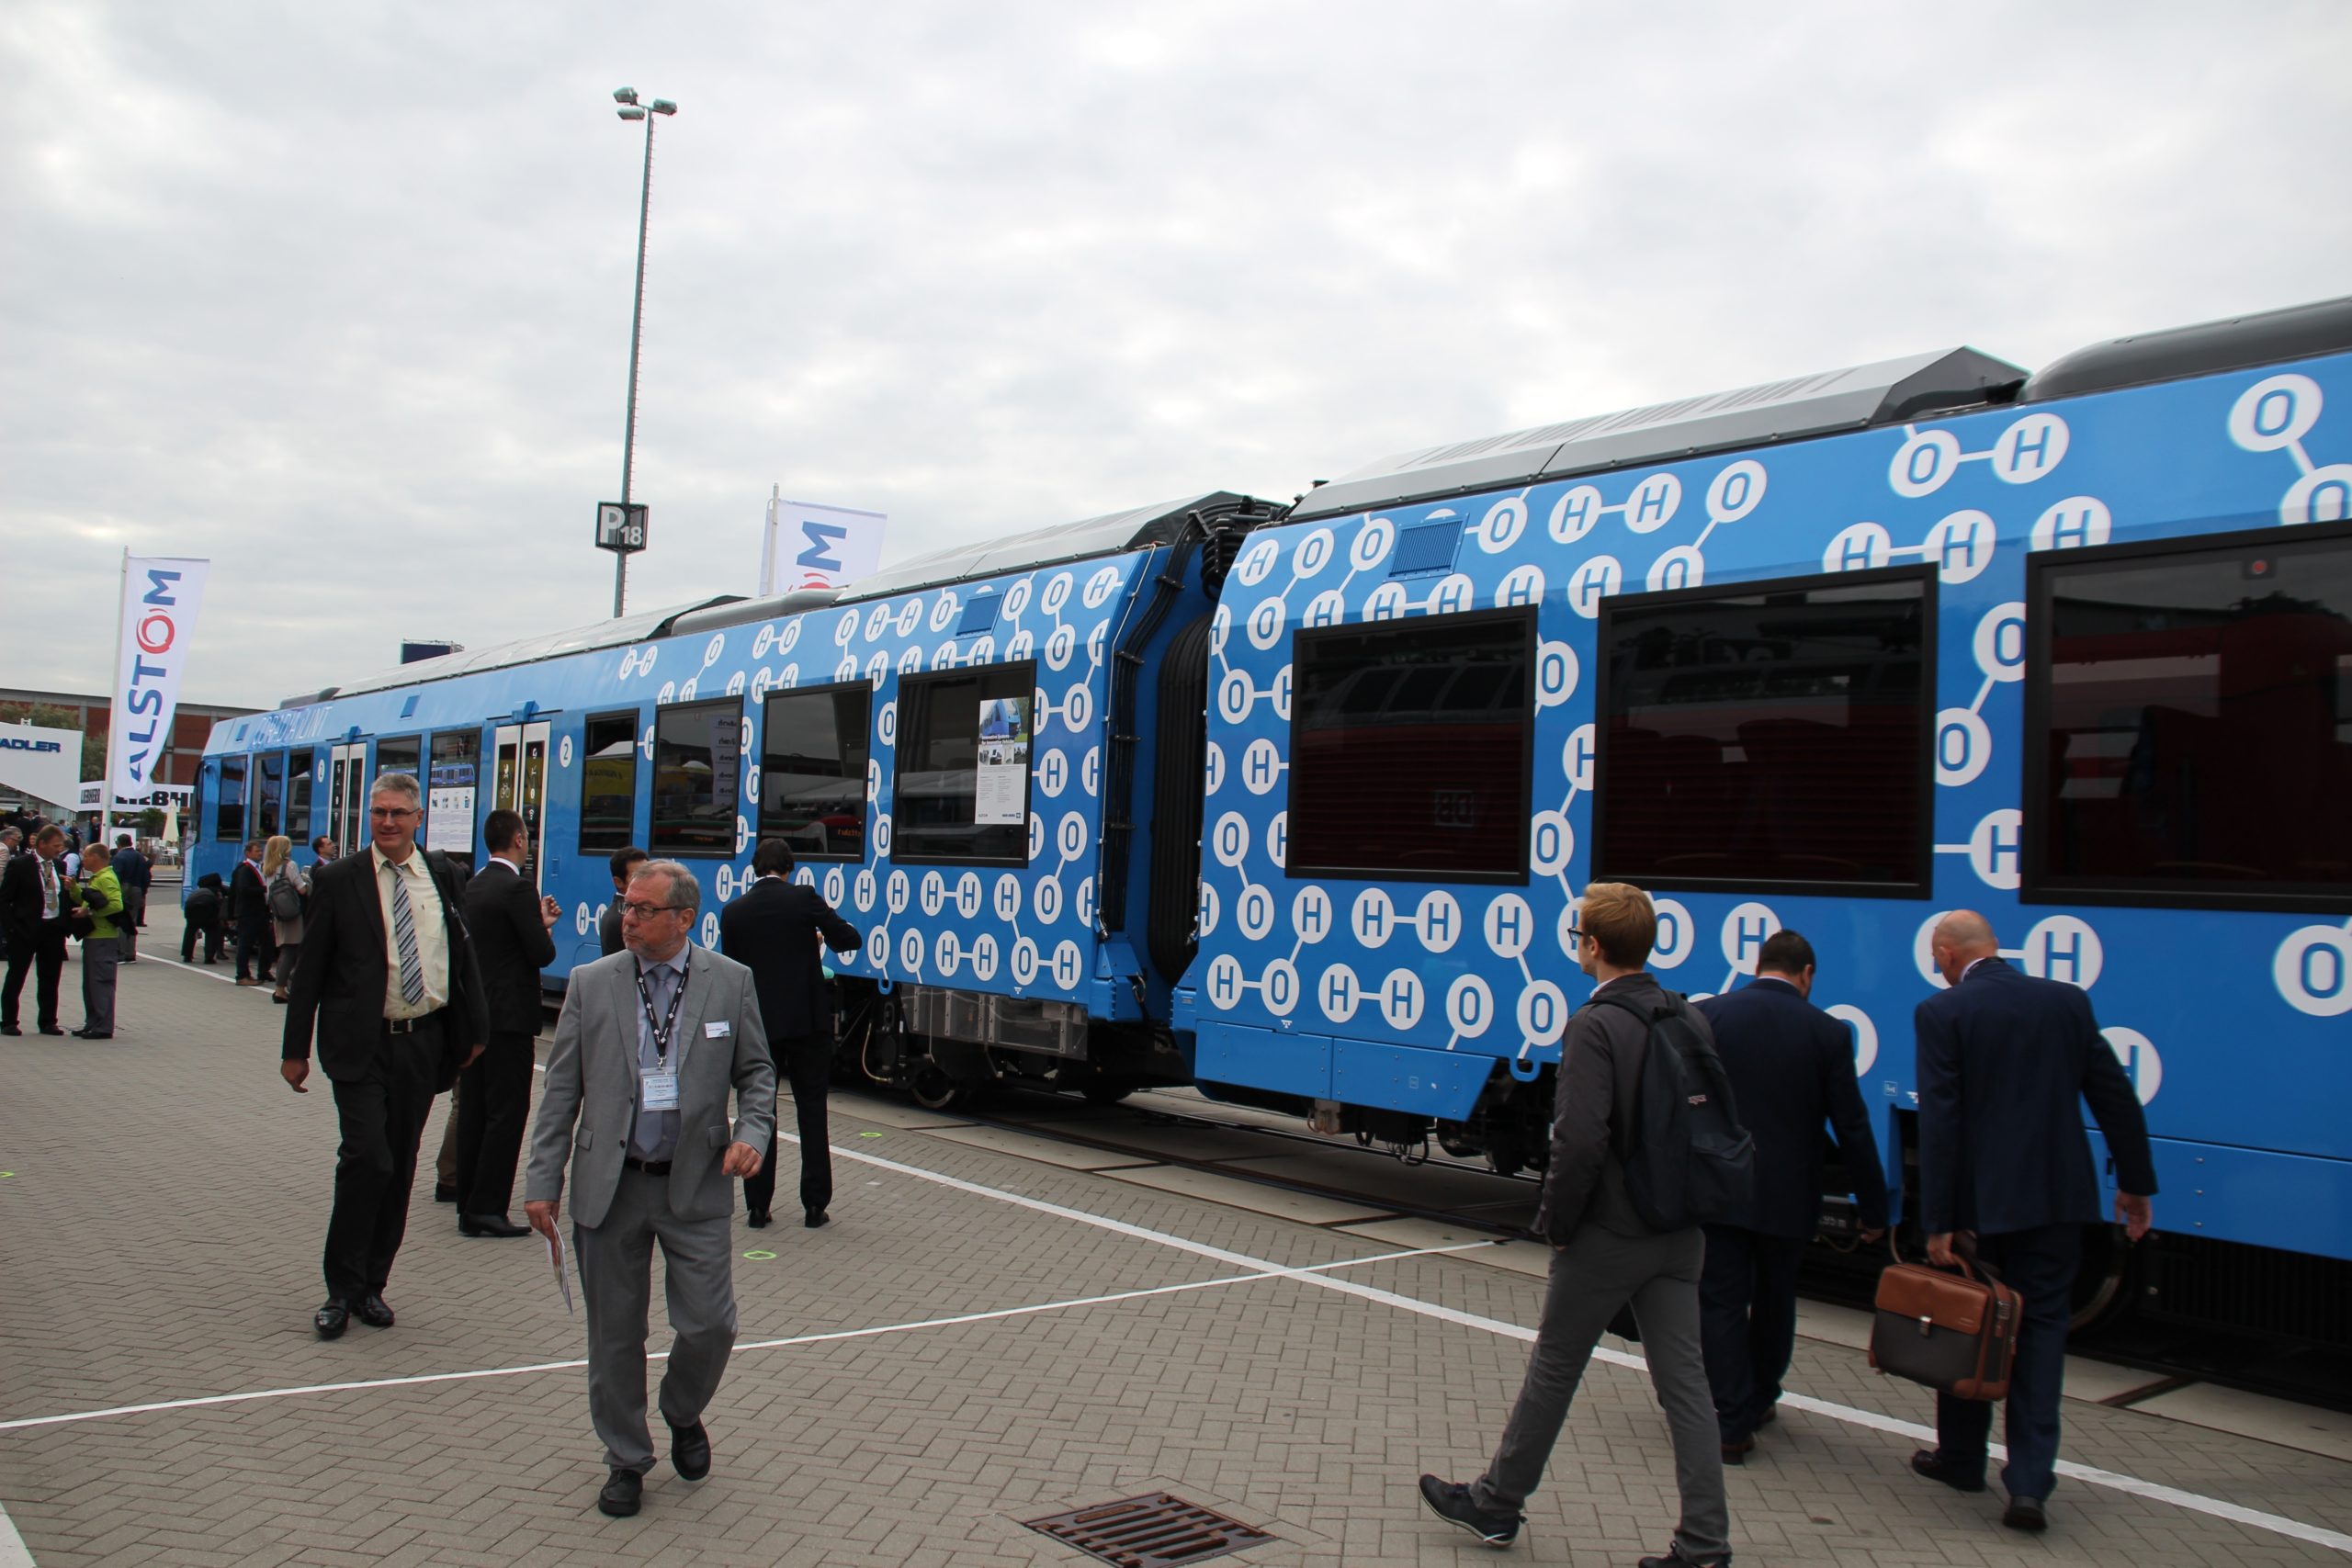 Blue and white passenger equipment surrounded by people